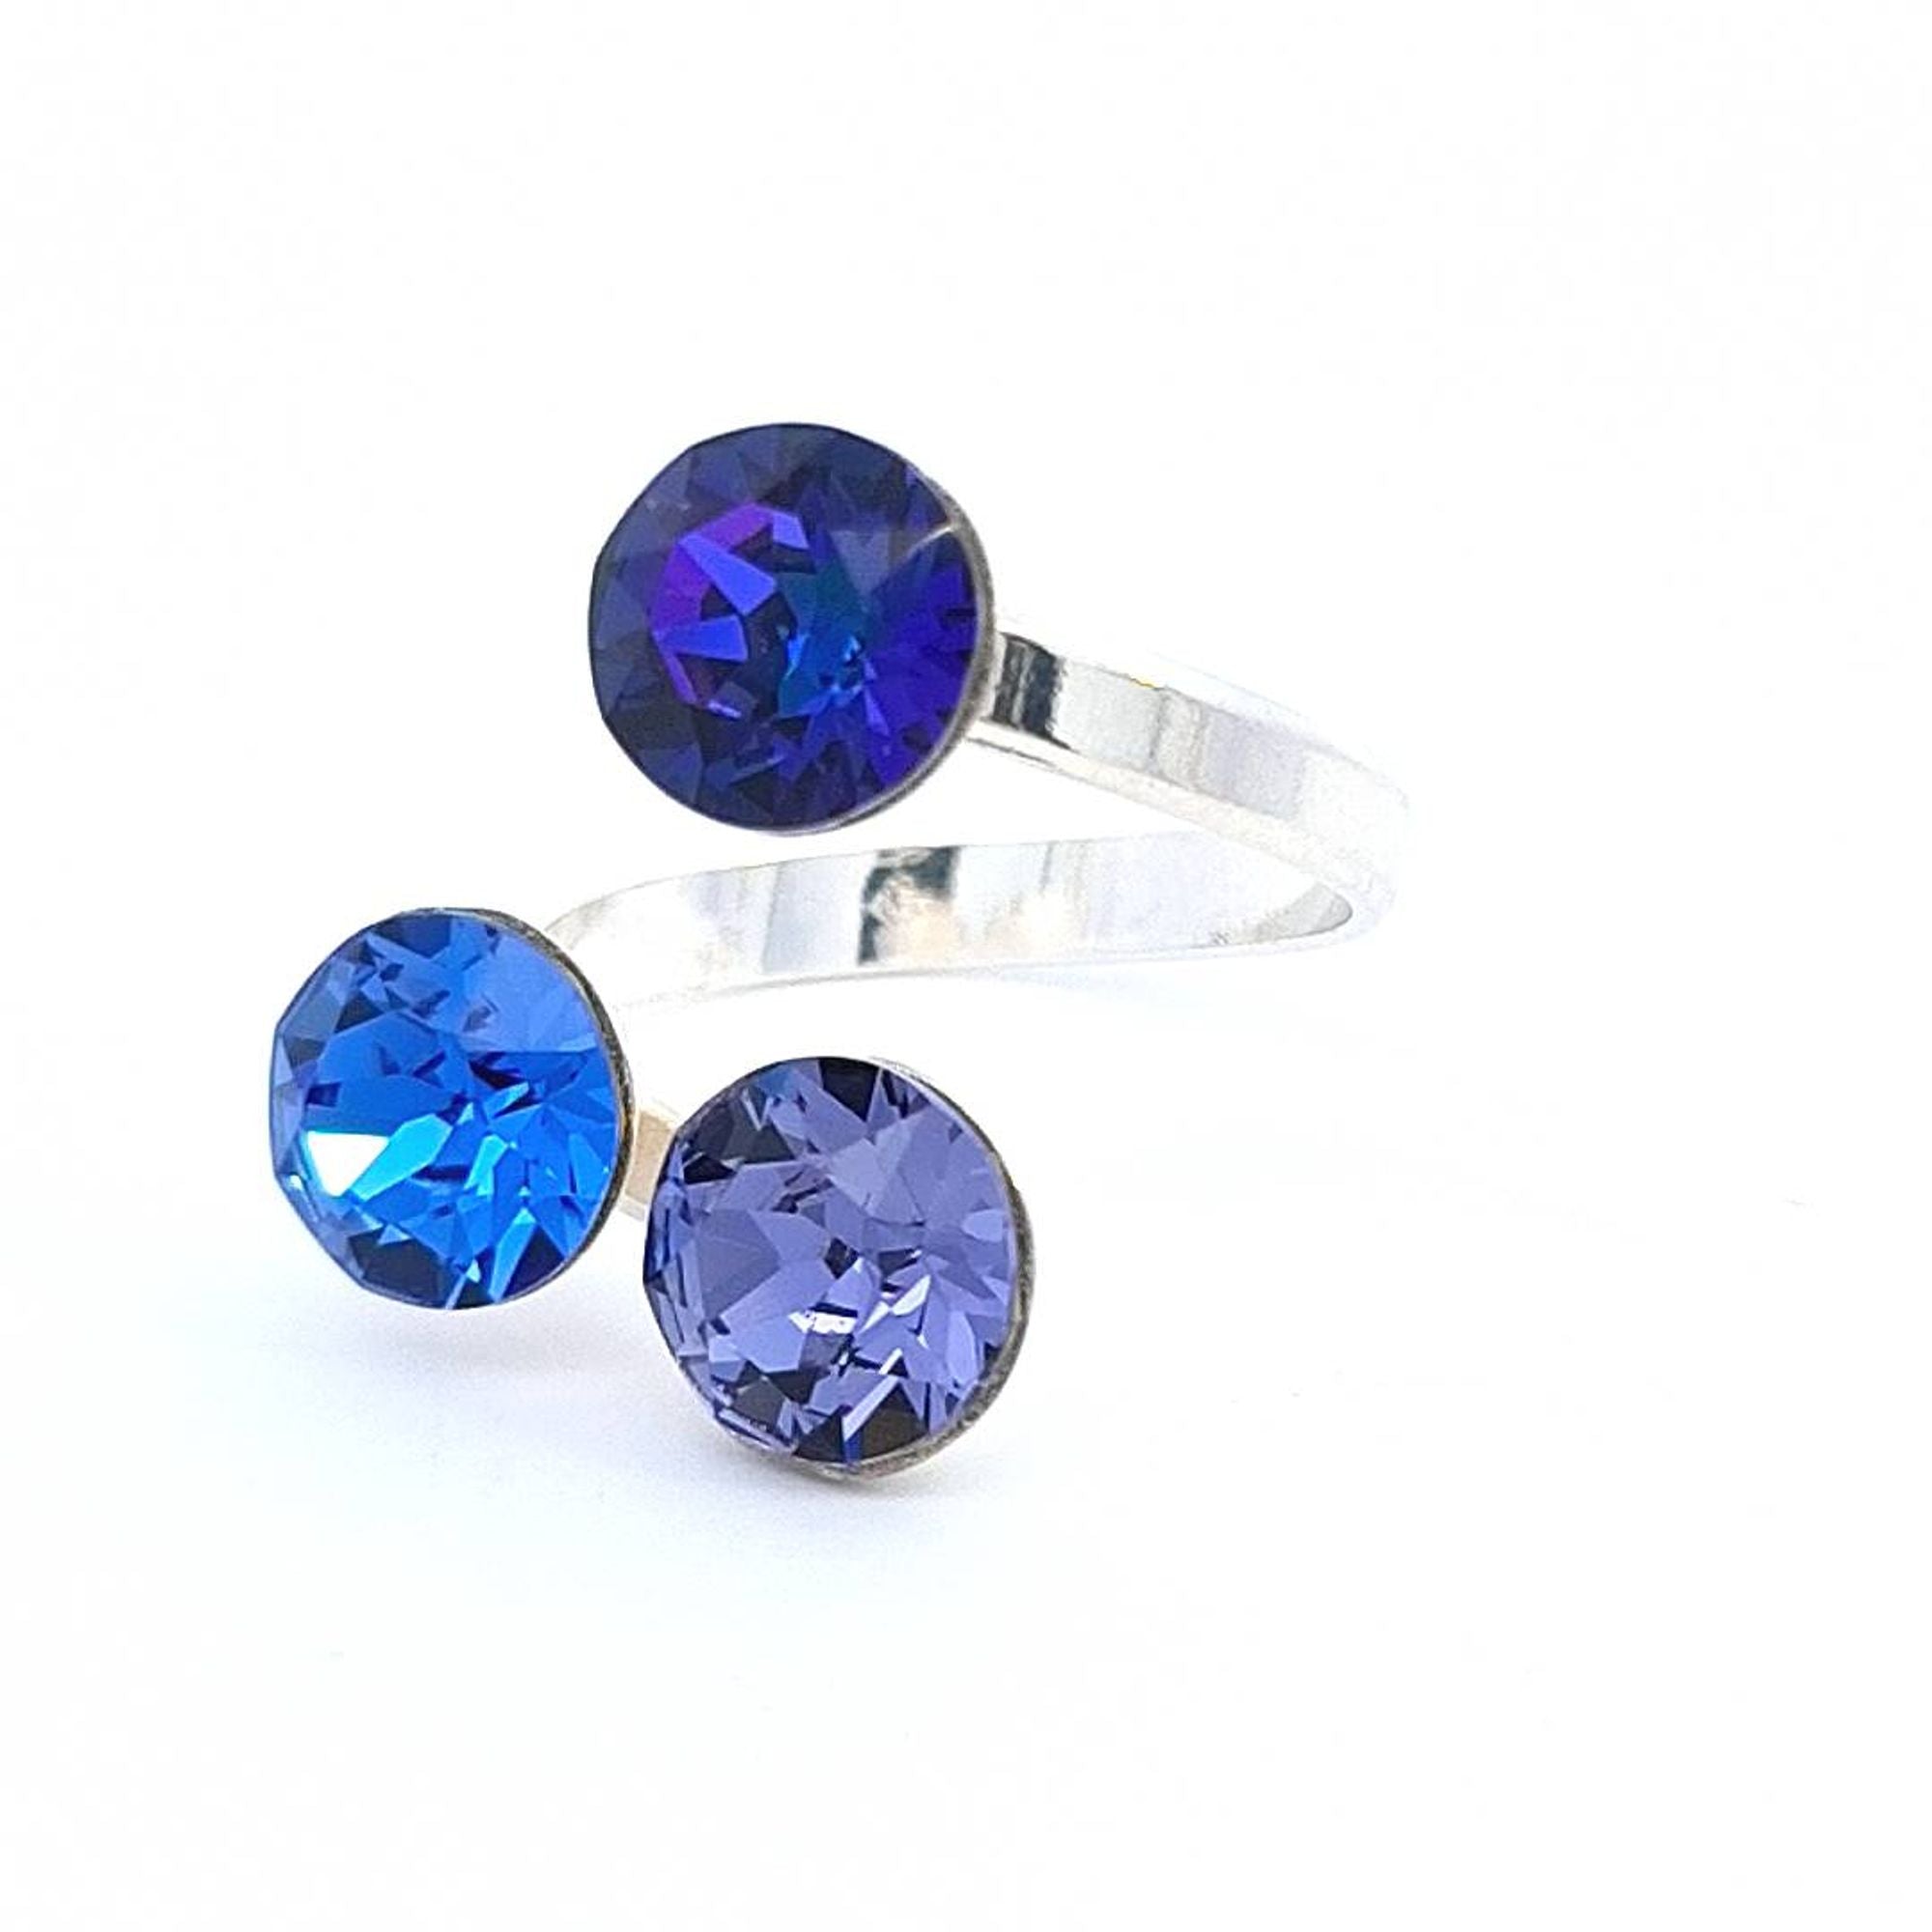 Triad Treasure Cluster Ring in Sterling Silver with Dazzling Blue-Purple Crystals by Magpie Gems from Ireland